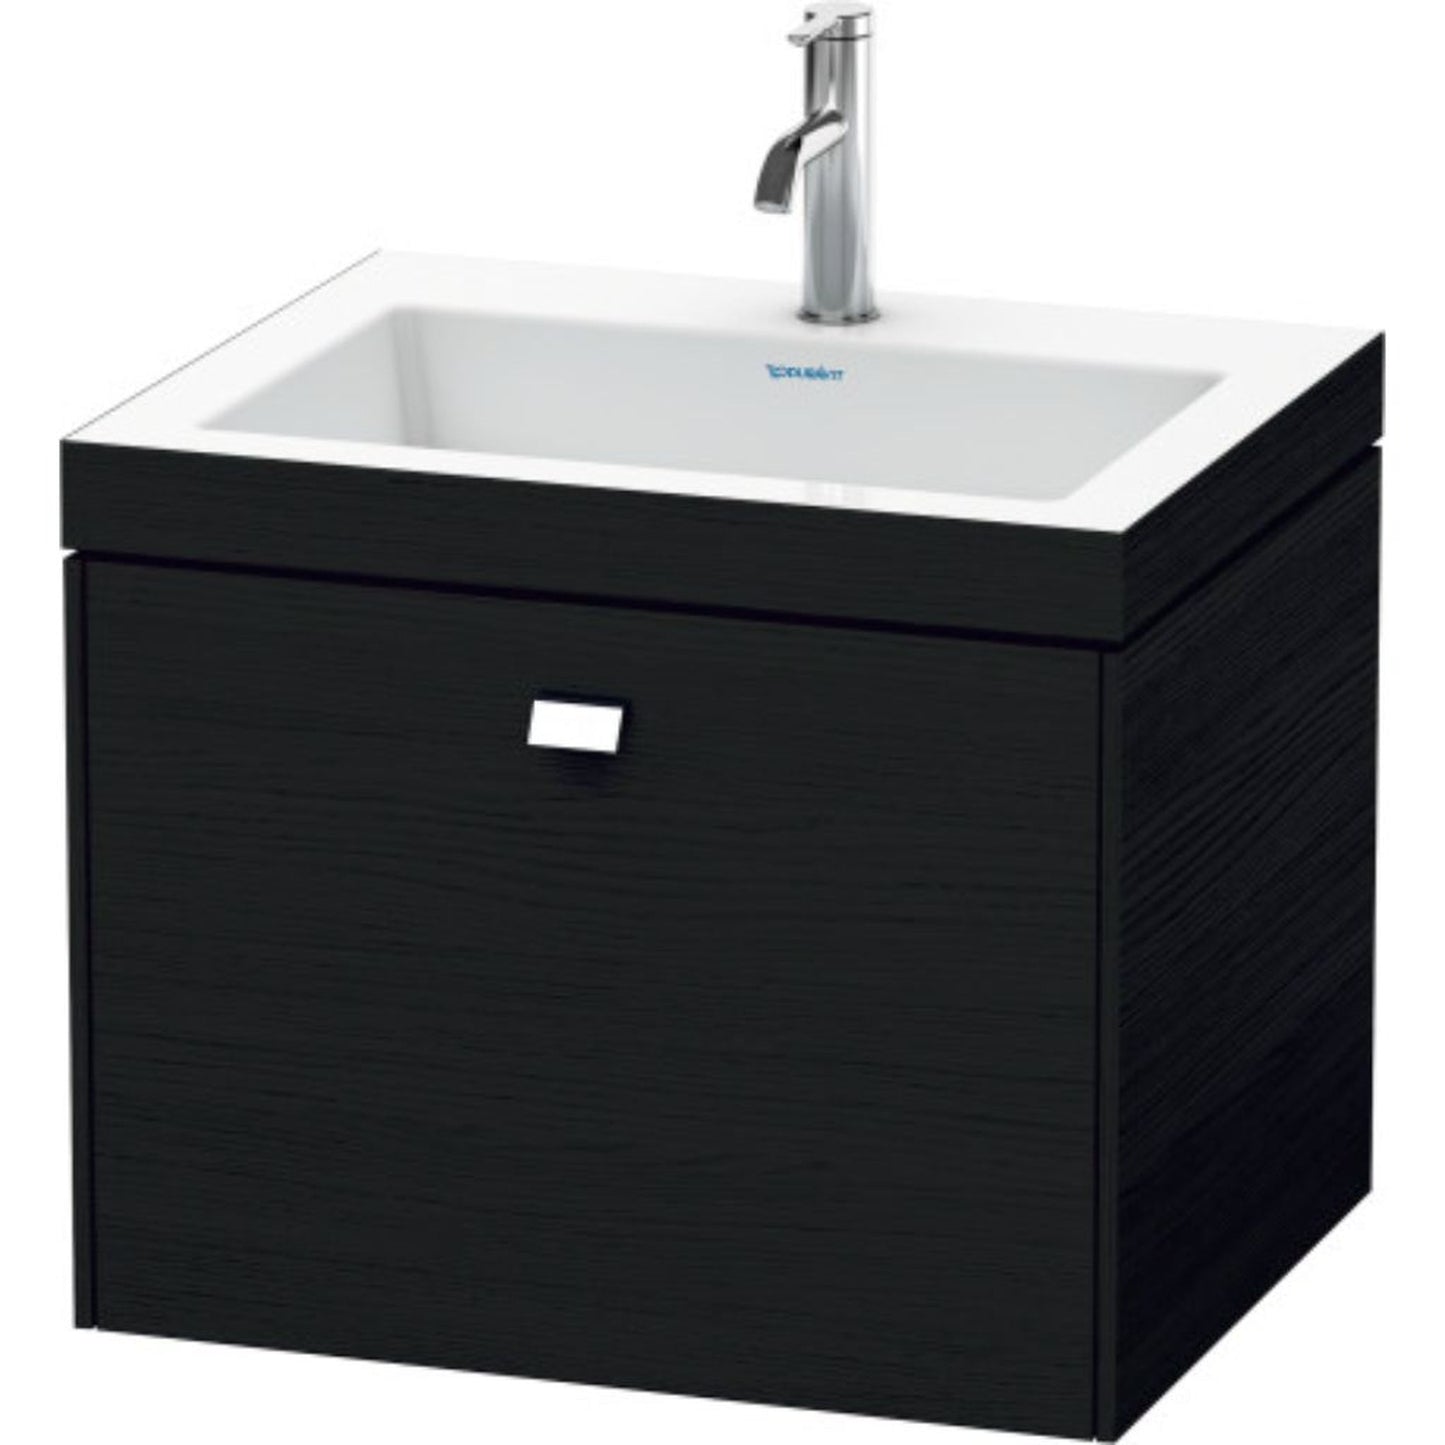 Duravit Brioso 24" x 20" x 19" One Drawer C-Bonded Wall-Mount Vanity Kit With One Tap Hole in Black Oak and Chrome Handle